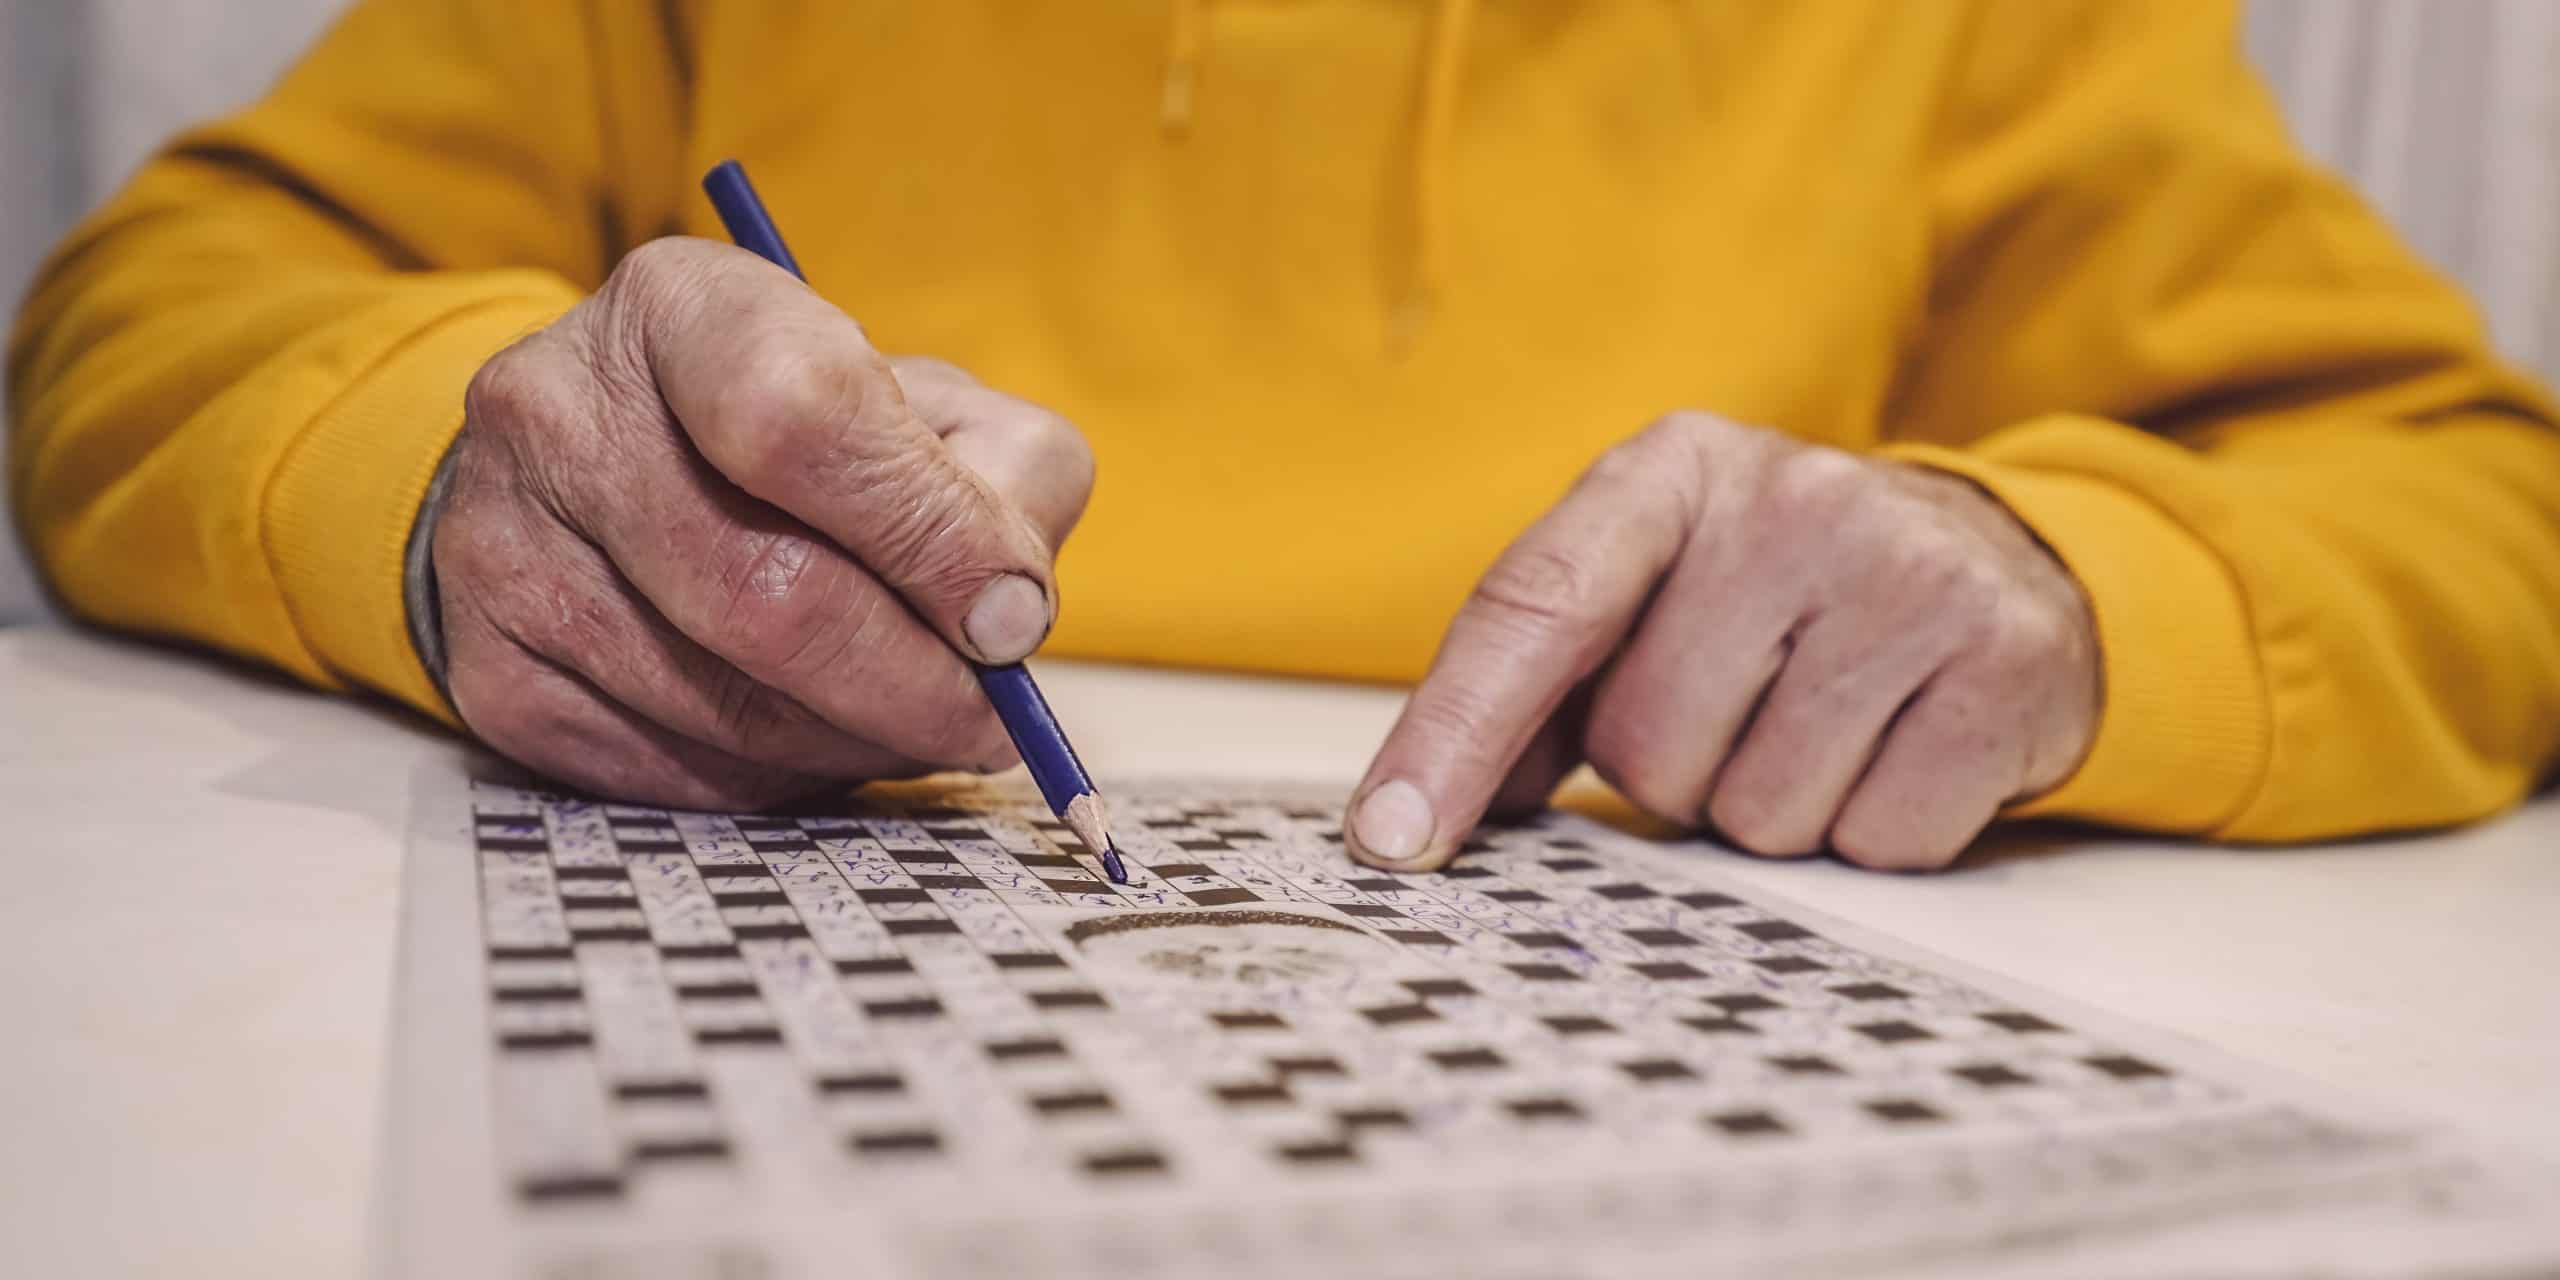 older person working on a crossword puzzle